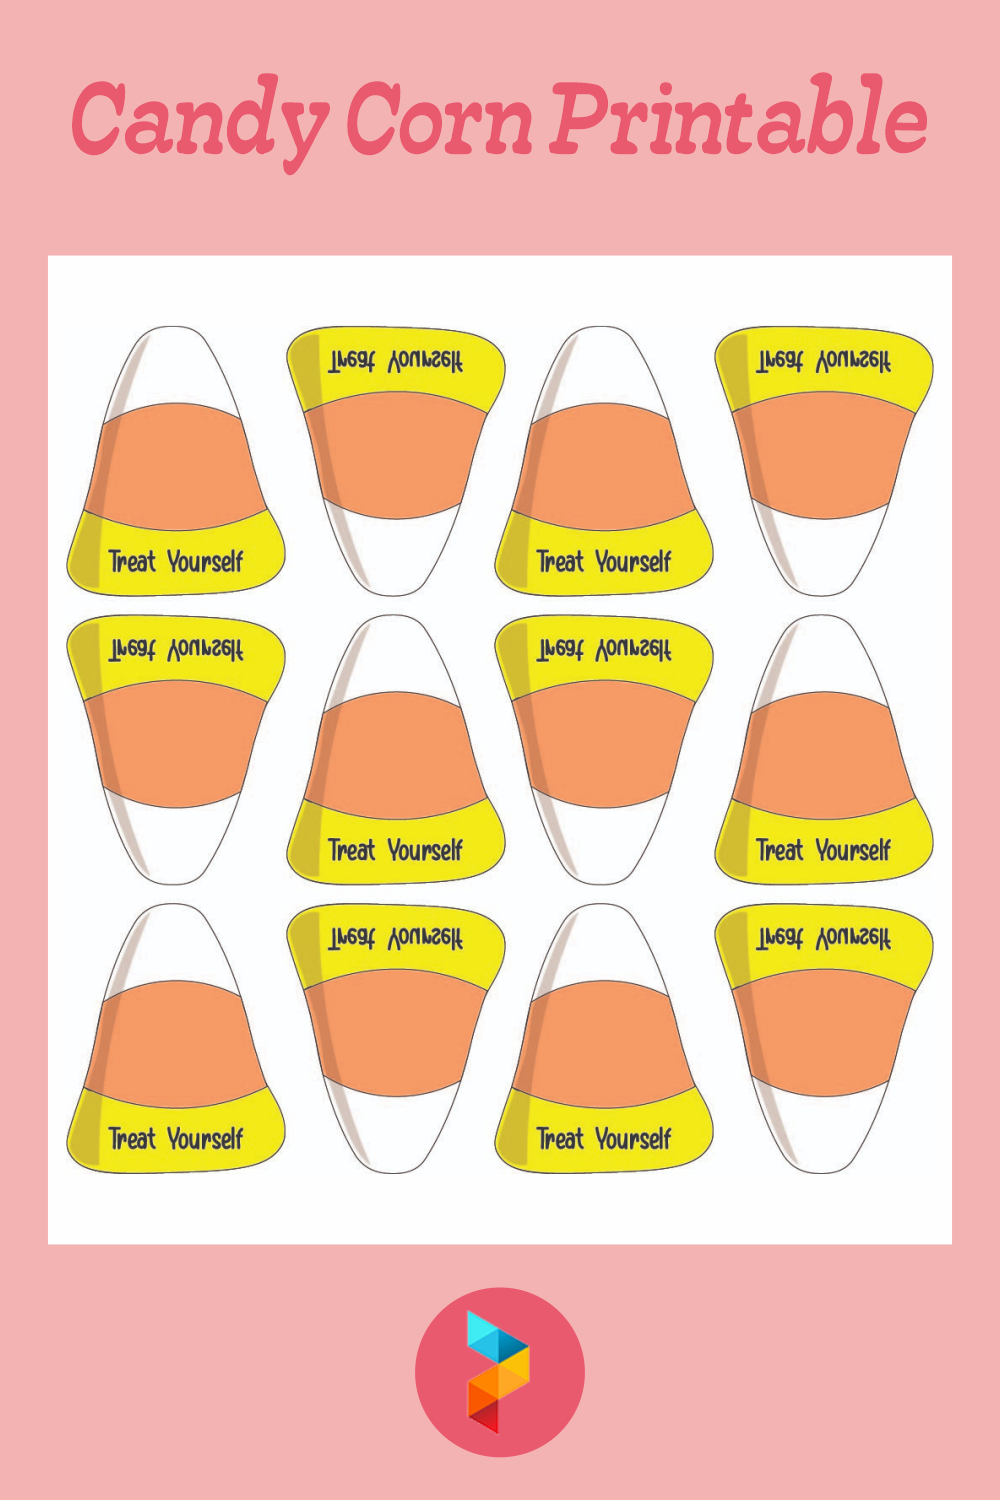 10 Best Candy Corn Printable